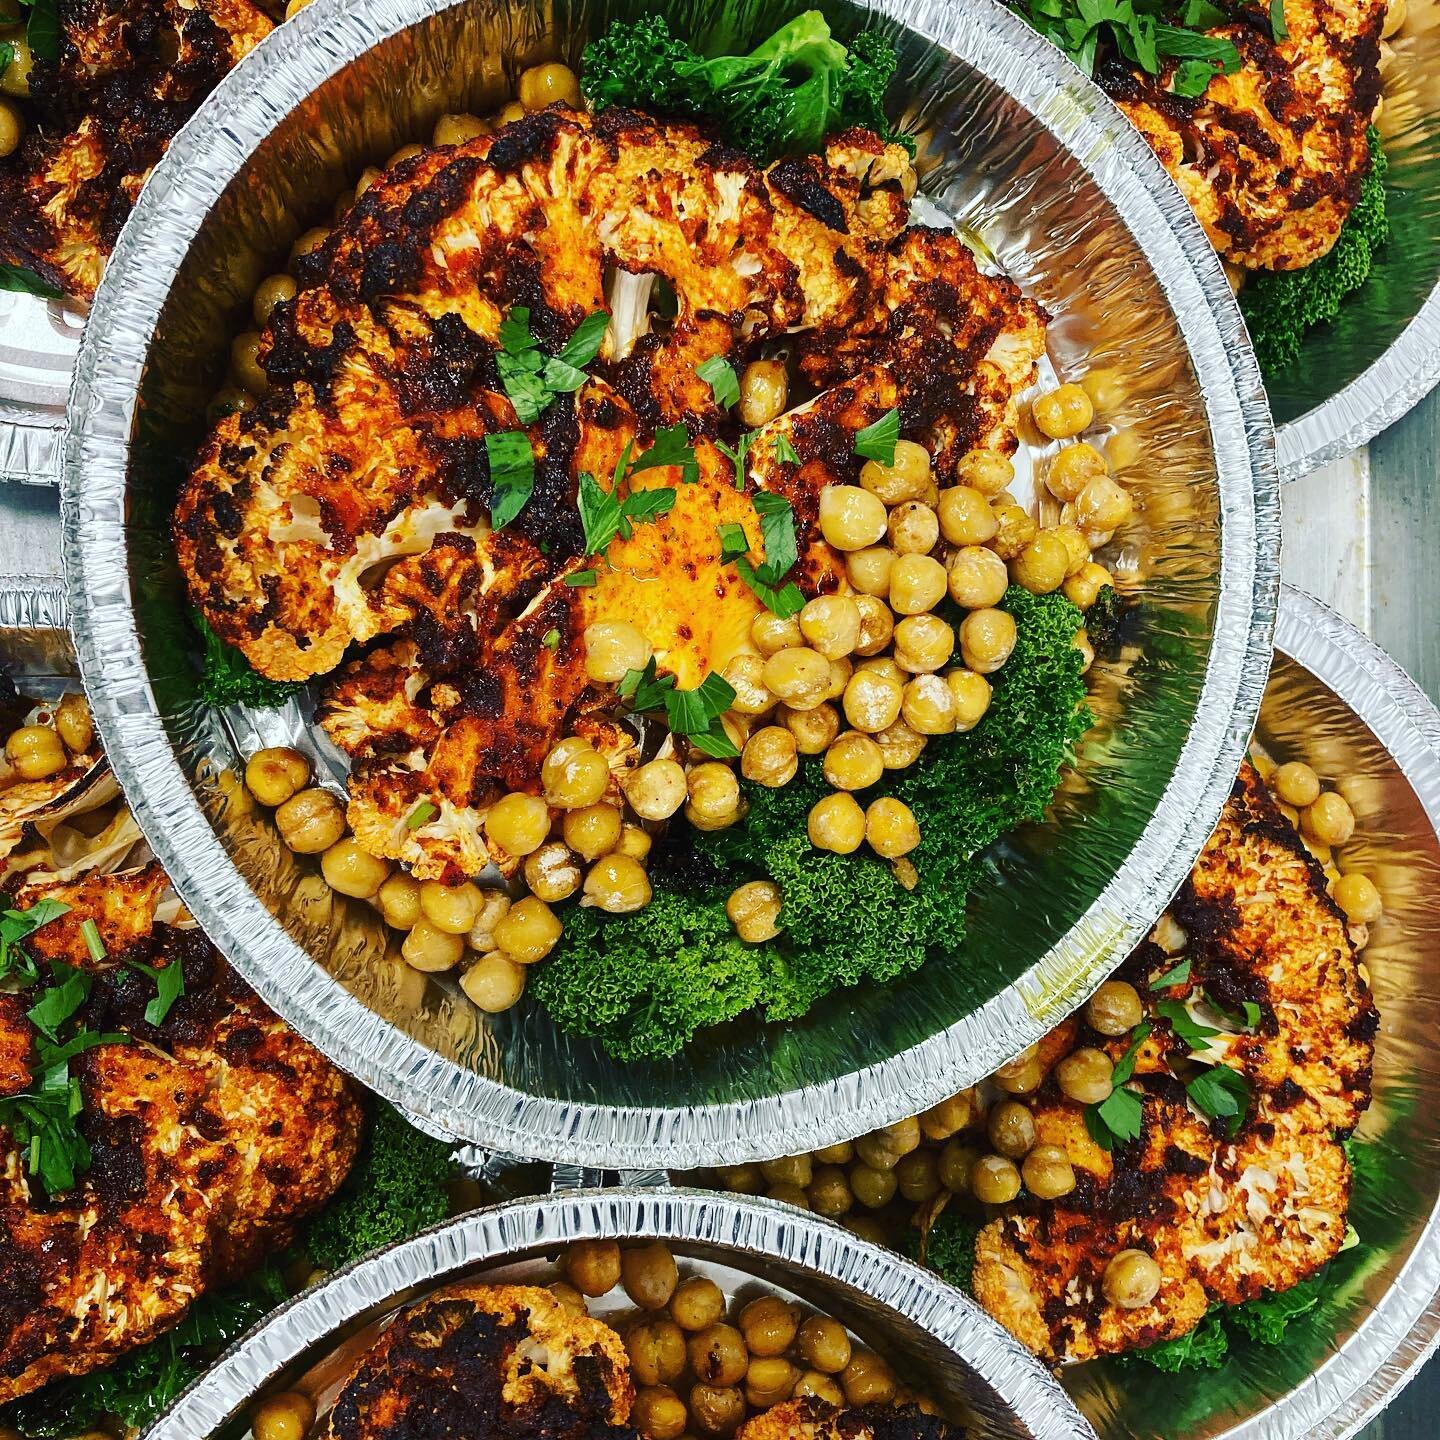 Look at these cuties, this is a snap of a batch of our cauliflower steak roast dinners headed out the door
🎁
Order your holiday feast by Sunday December 20th. Plus as an extra thank you for supporting small business you will be getting 2 cans of @so